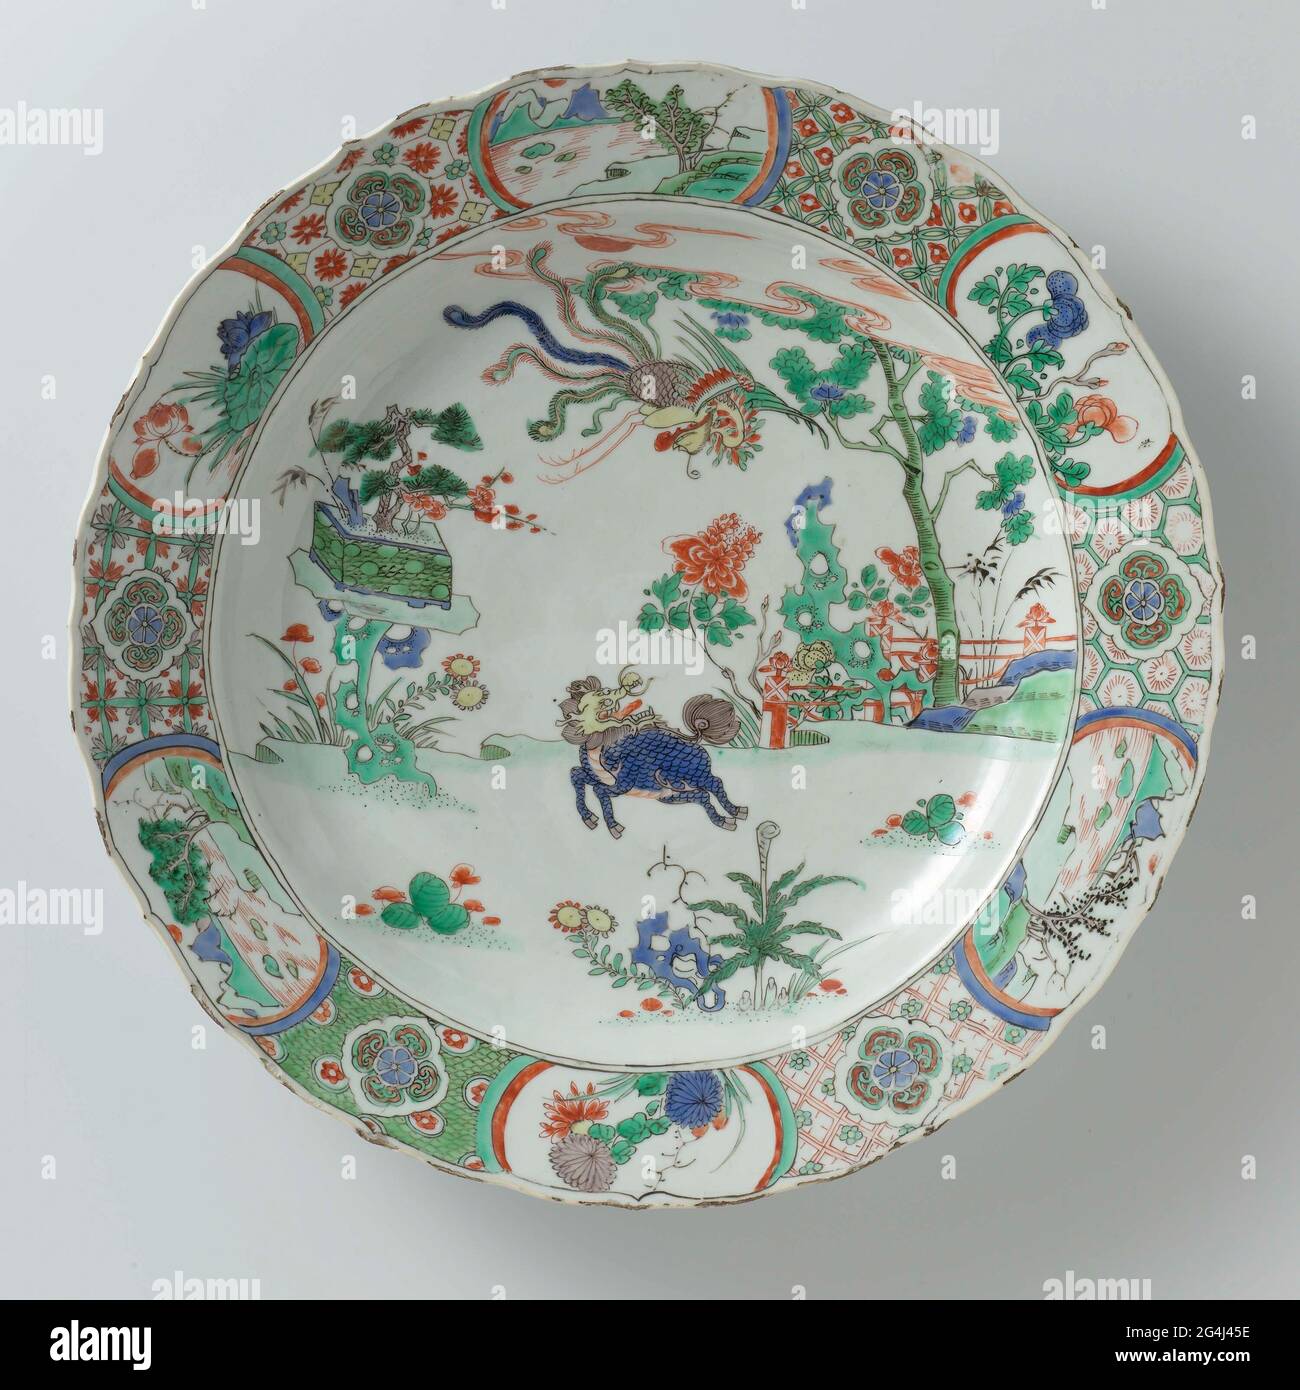 . Dish of porcelain with a scalloped edge, painted in underglaze blue and on the glaze with blue, red, green, yellow, eggplant and black. On the flat a Qilin and flying Feng Huang in a landscape with right rocks, peony plant and tree for a fence and left a pot with prunus, pine and bamboo on a rock; The edge with six times a flower rosette with four ruyi motifs in a lobd cartouches surrounded by a geometric pattern, interspersed by six times a plant (lotus, chrysanthemum, peony) or a river landscape in a cartouche. Marked on the bottom with an artemisia leaf in a double circle. Edge damaged. O Stock Photo